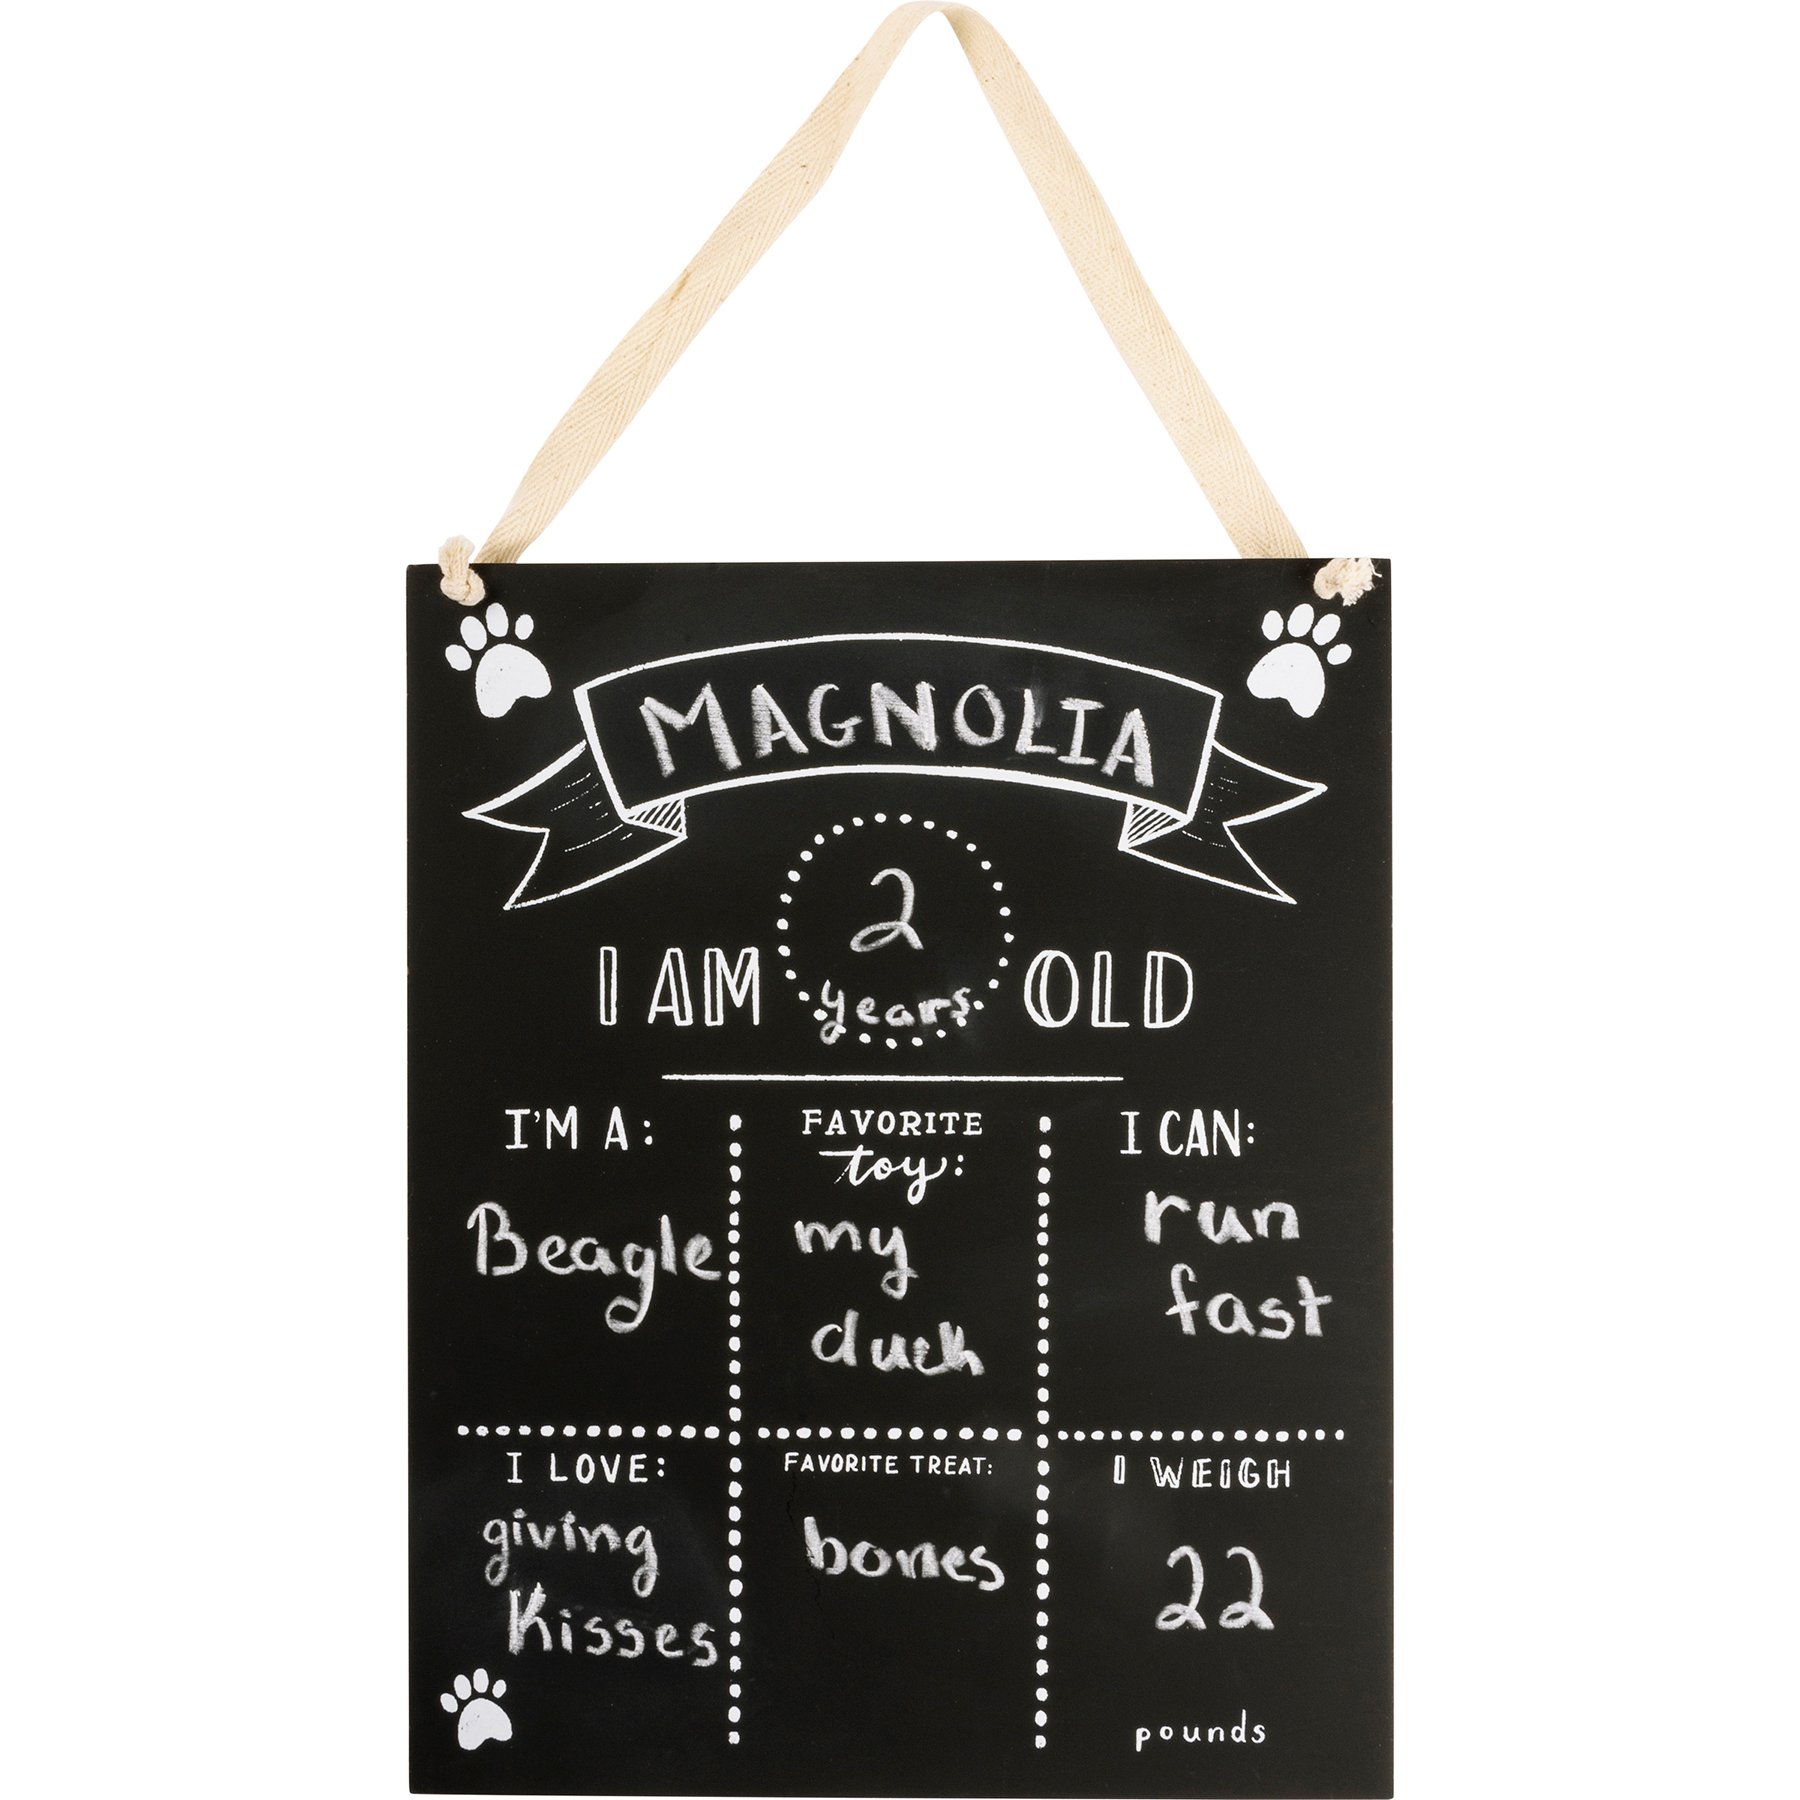 Cohas Birthday Milestone Board for Dogs with Party Theme and Reusable Chalkboard Style Surface 9 by 12 Inches 3 Pastel Markers